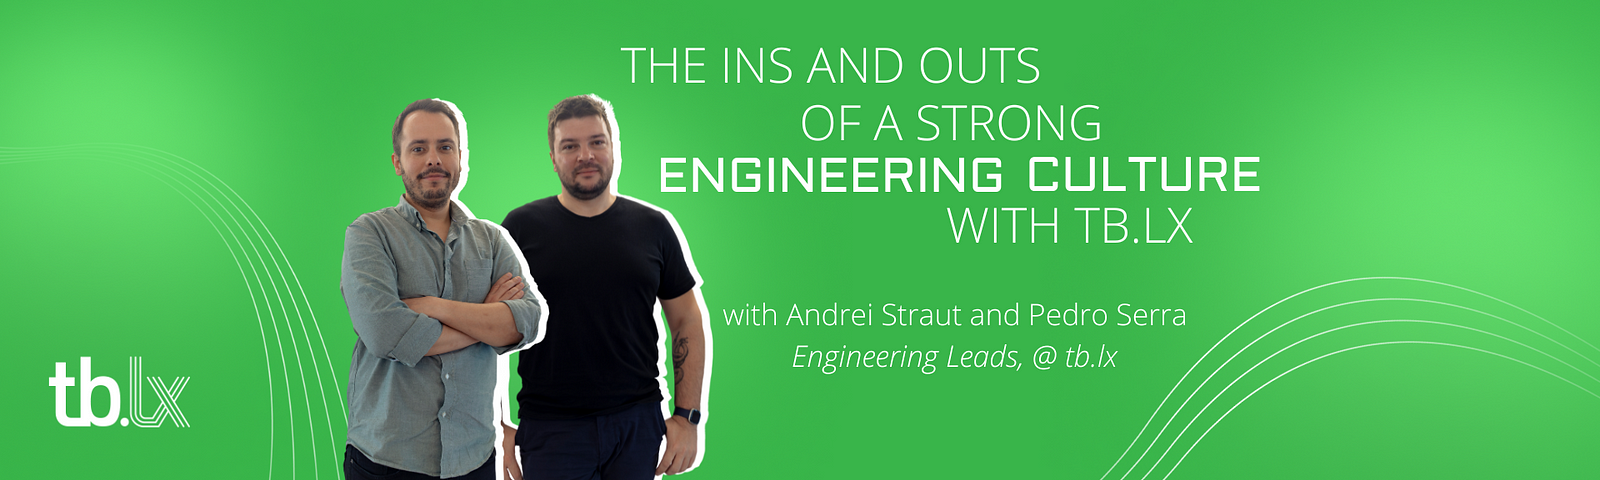 This is a Medium banner to call readers to our article. It contains the title of the article which is The Ins and Outs of a Strong Engineering Culture with tb.lx, a photo of both Pedro and Andrei the interviewees of the article, and their names and titles underneath the title.